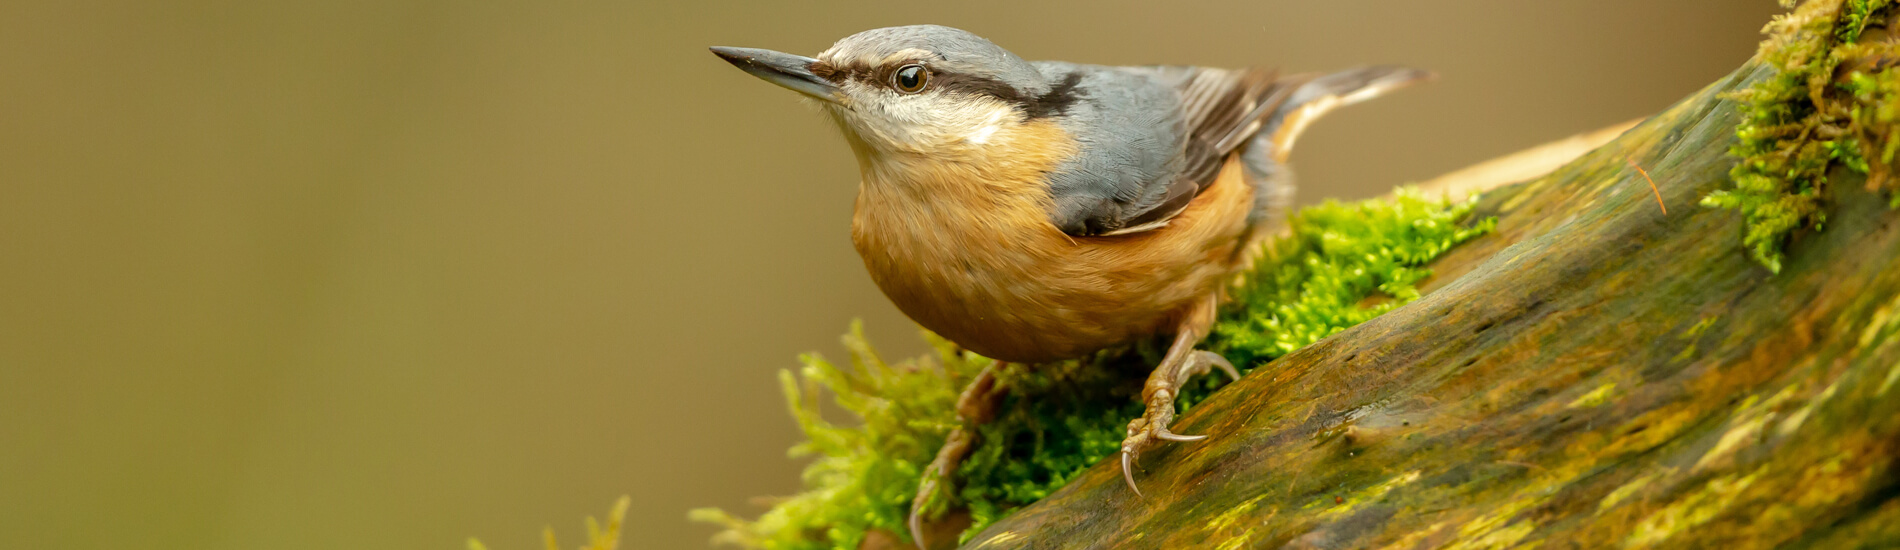 Nuthatch, Scientific Name: Sitta Europaea, In Natural Woodland H